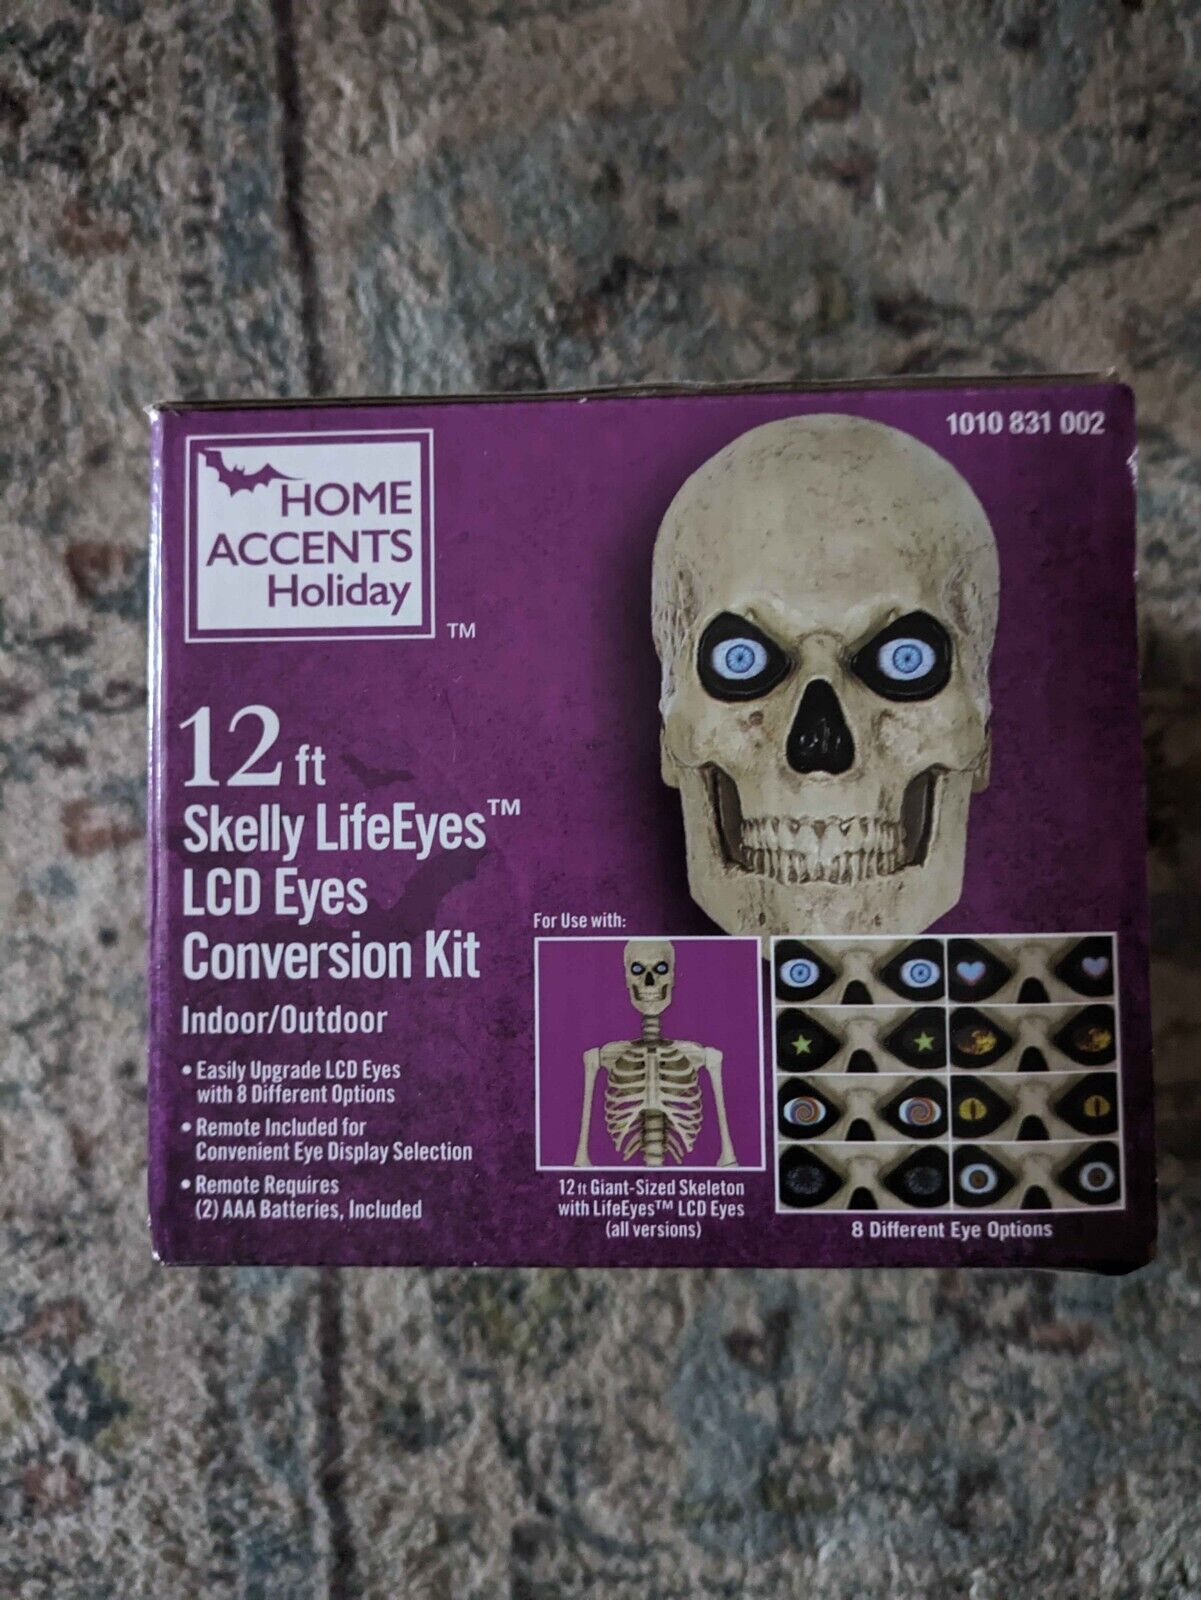 12 ft. Skeleton Skelly Eye Kit - Home Accents Holiday Halloween In Hand